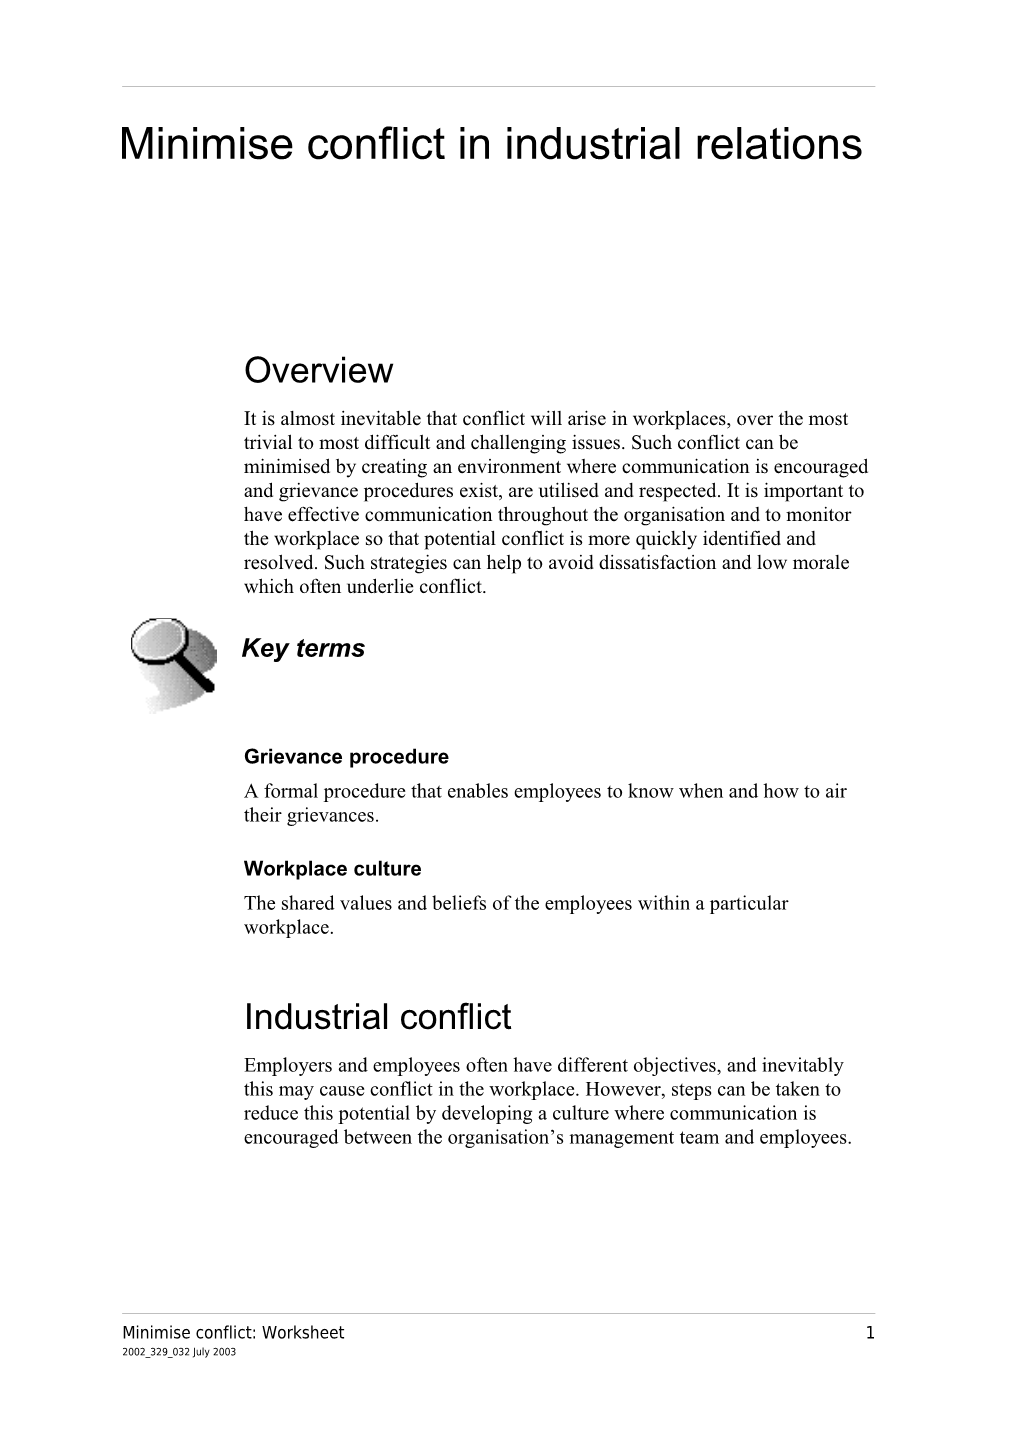 Minimise Conflict in Industrial Relations